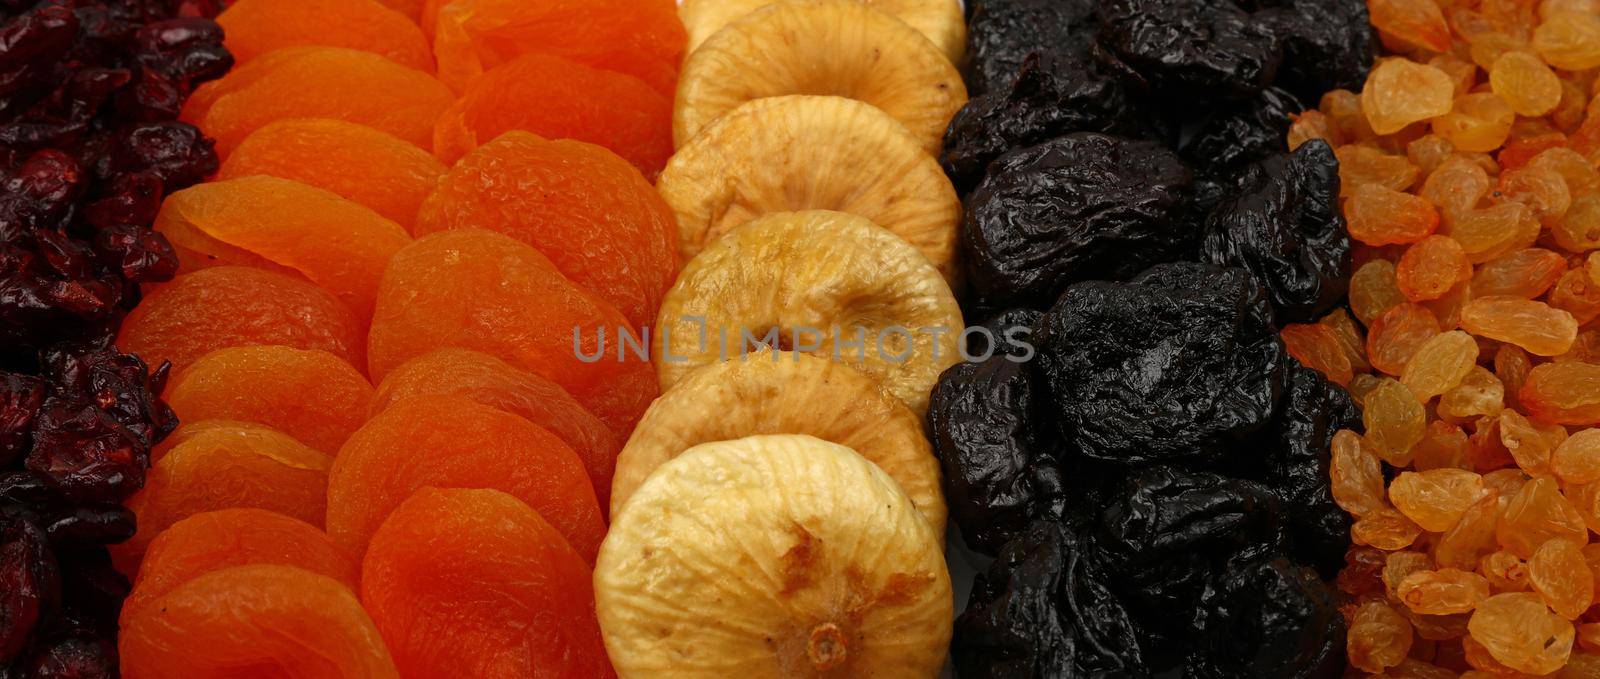 Background of assorted sundried fruits by BreakingTheWalls